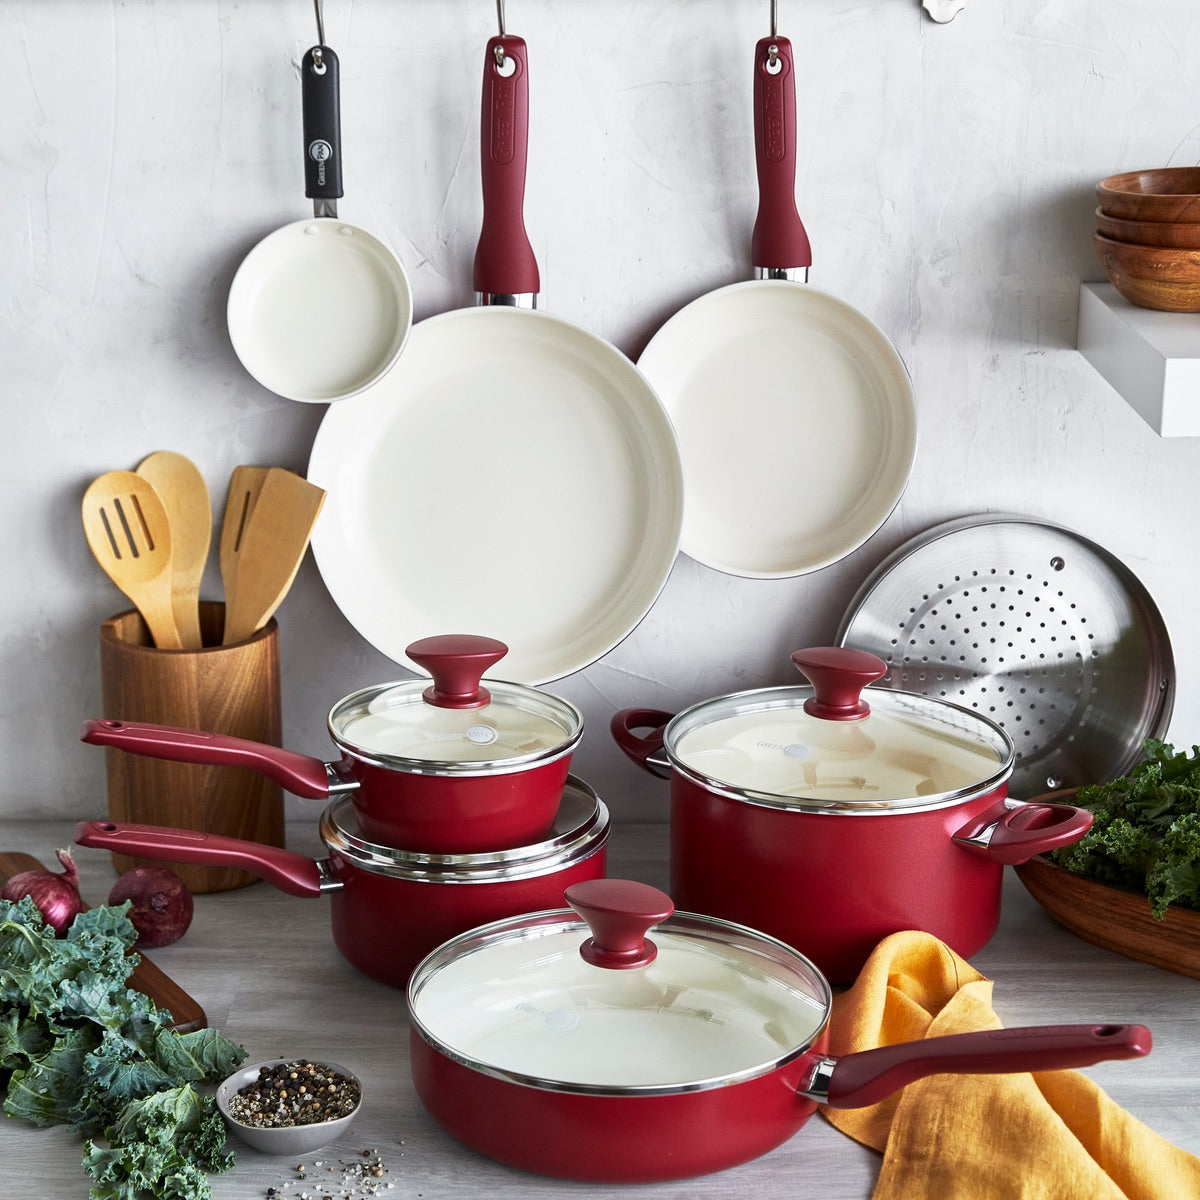 14 Pc Ceramic Induction-Ready Cookware Set - Red